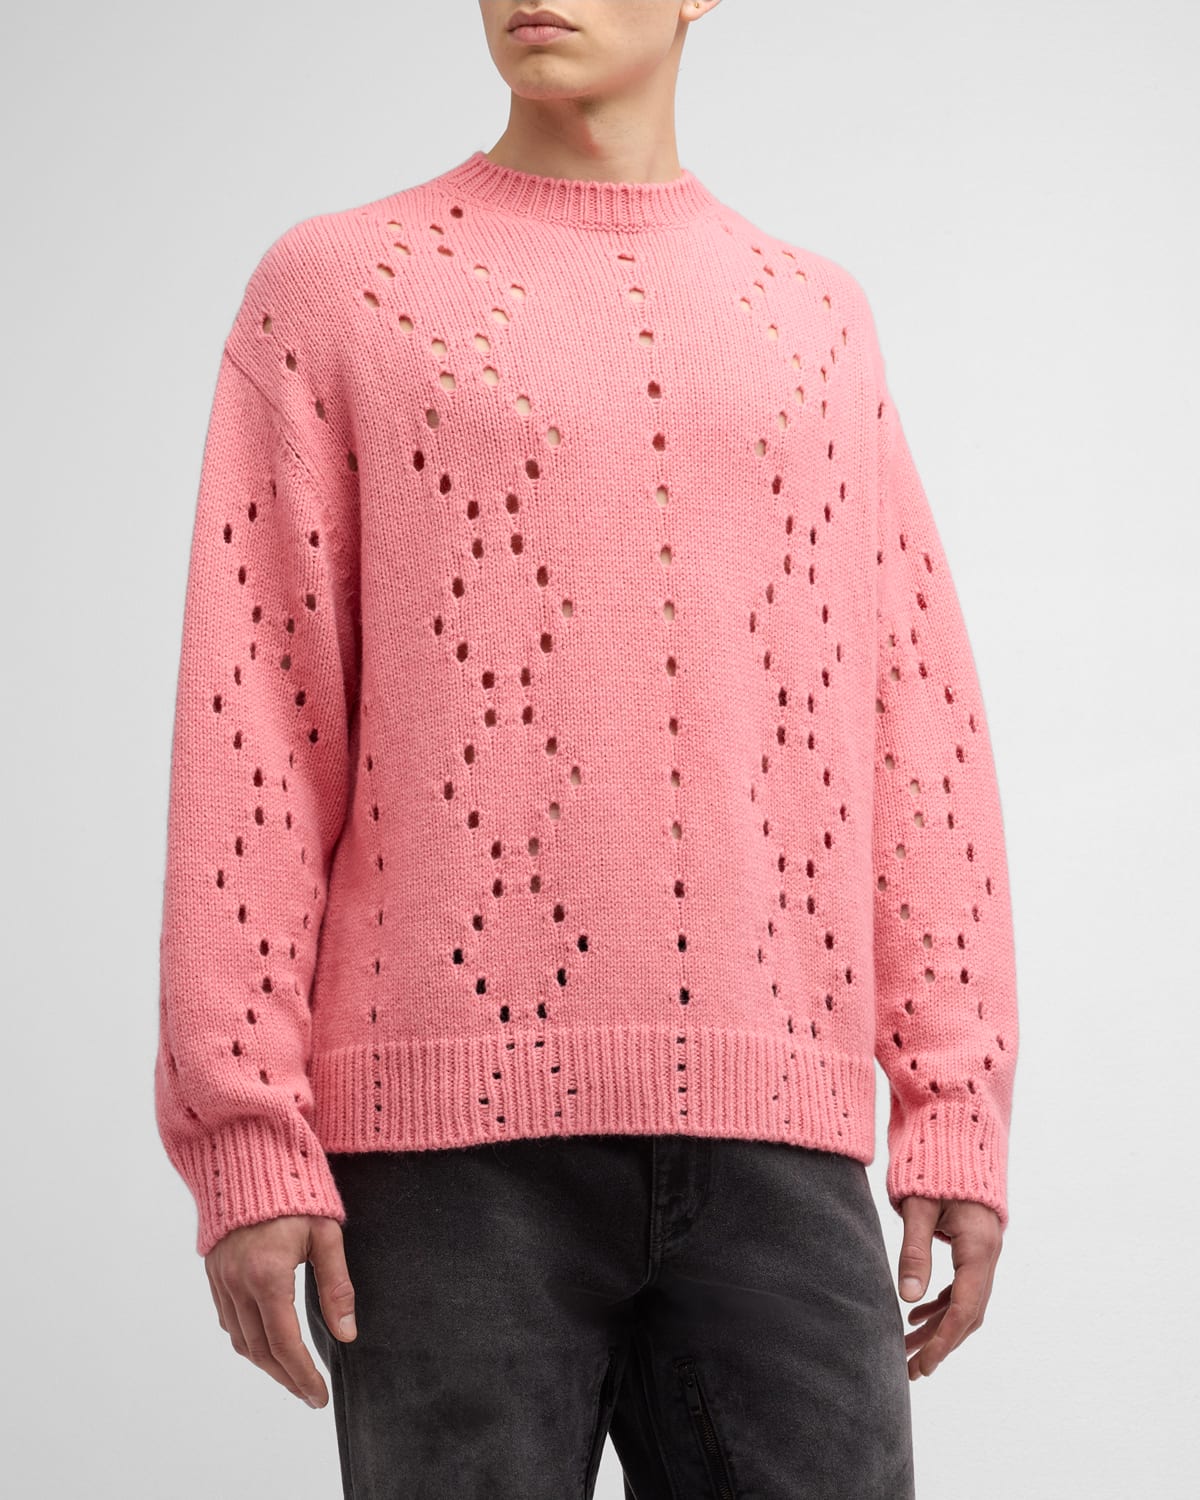 Shop Givenchy Men's Oversized Holey Sweater In Flamingo